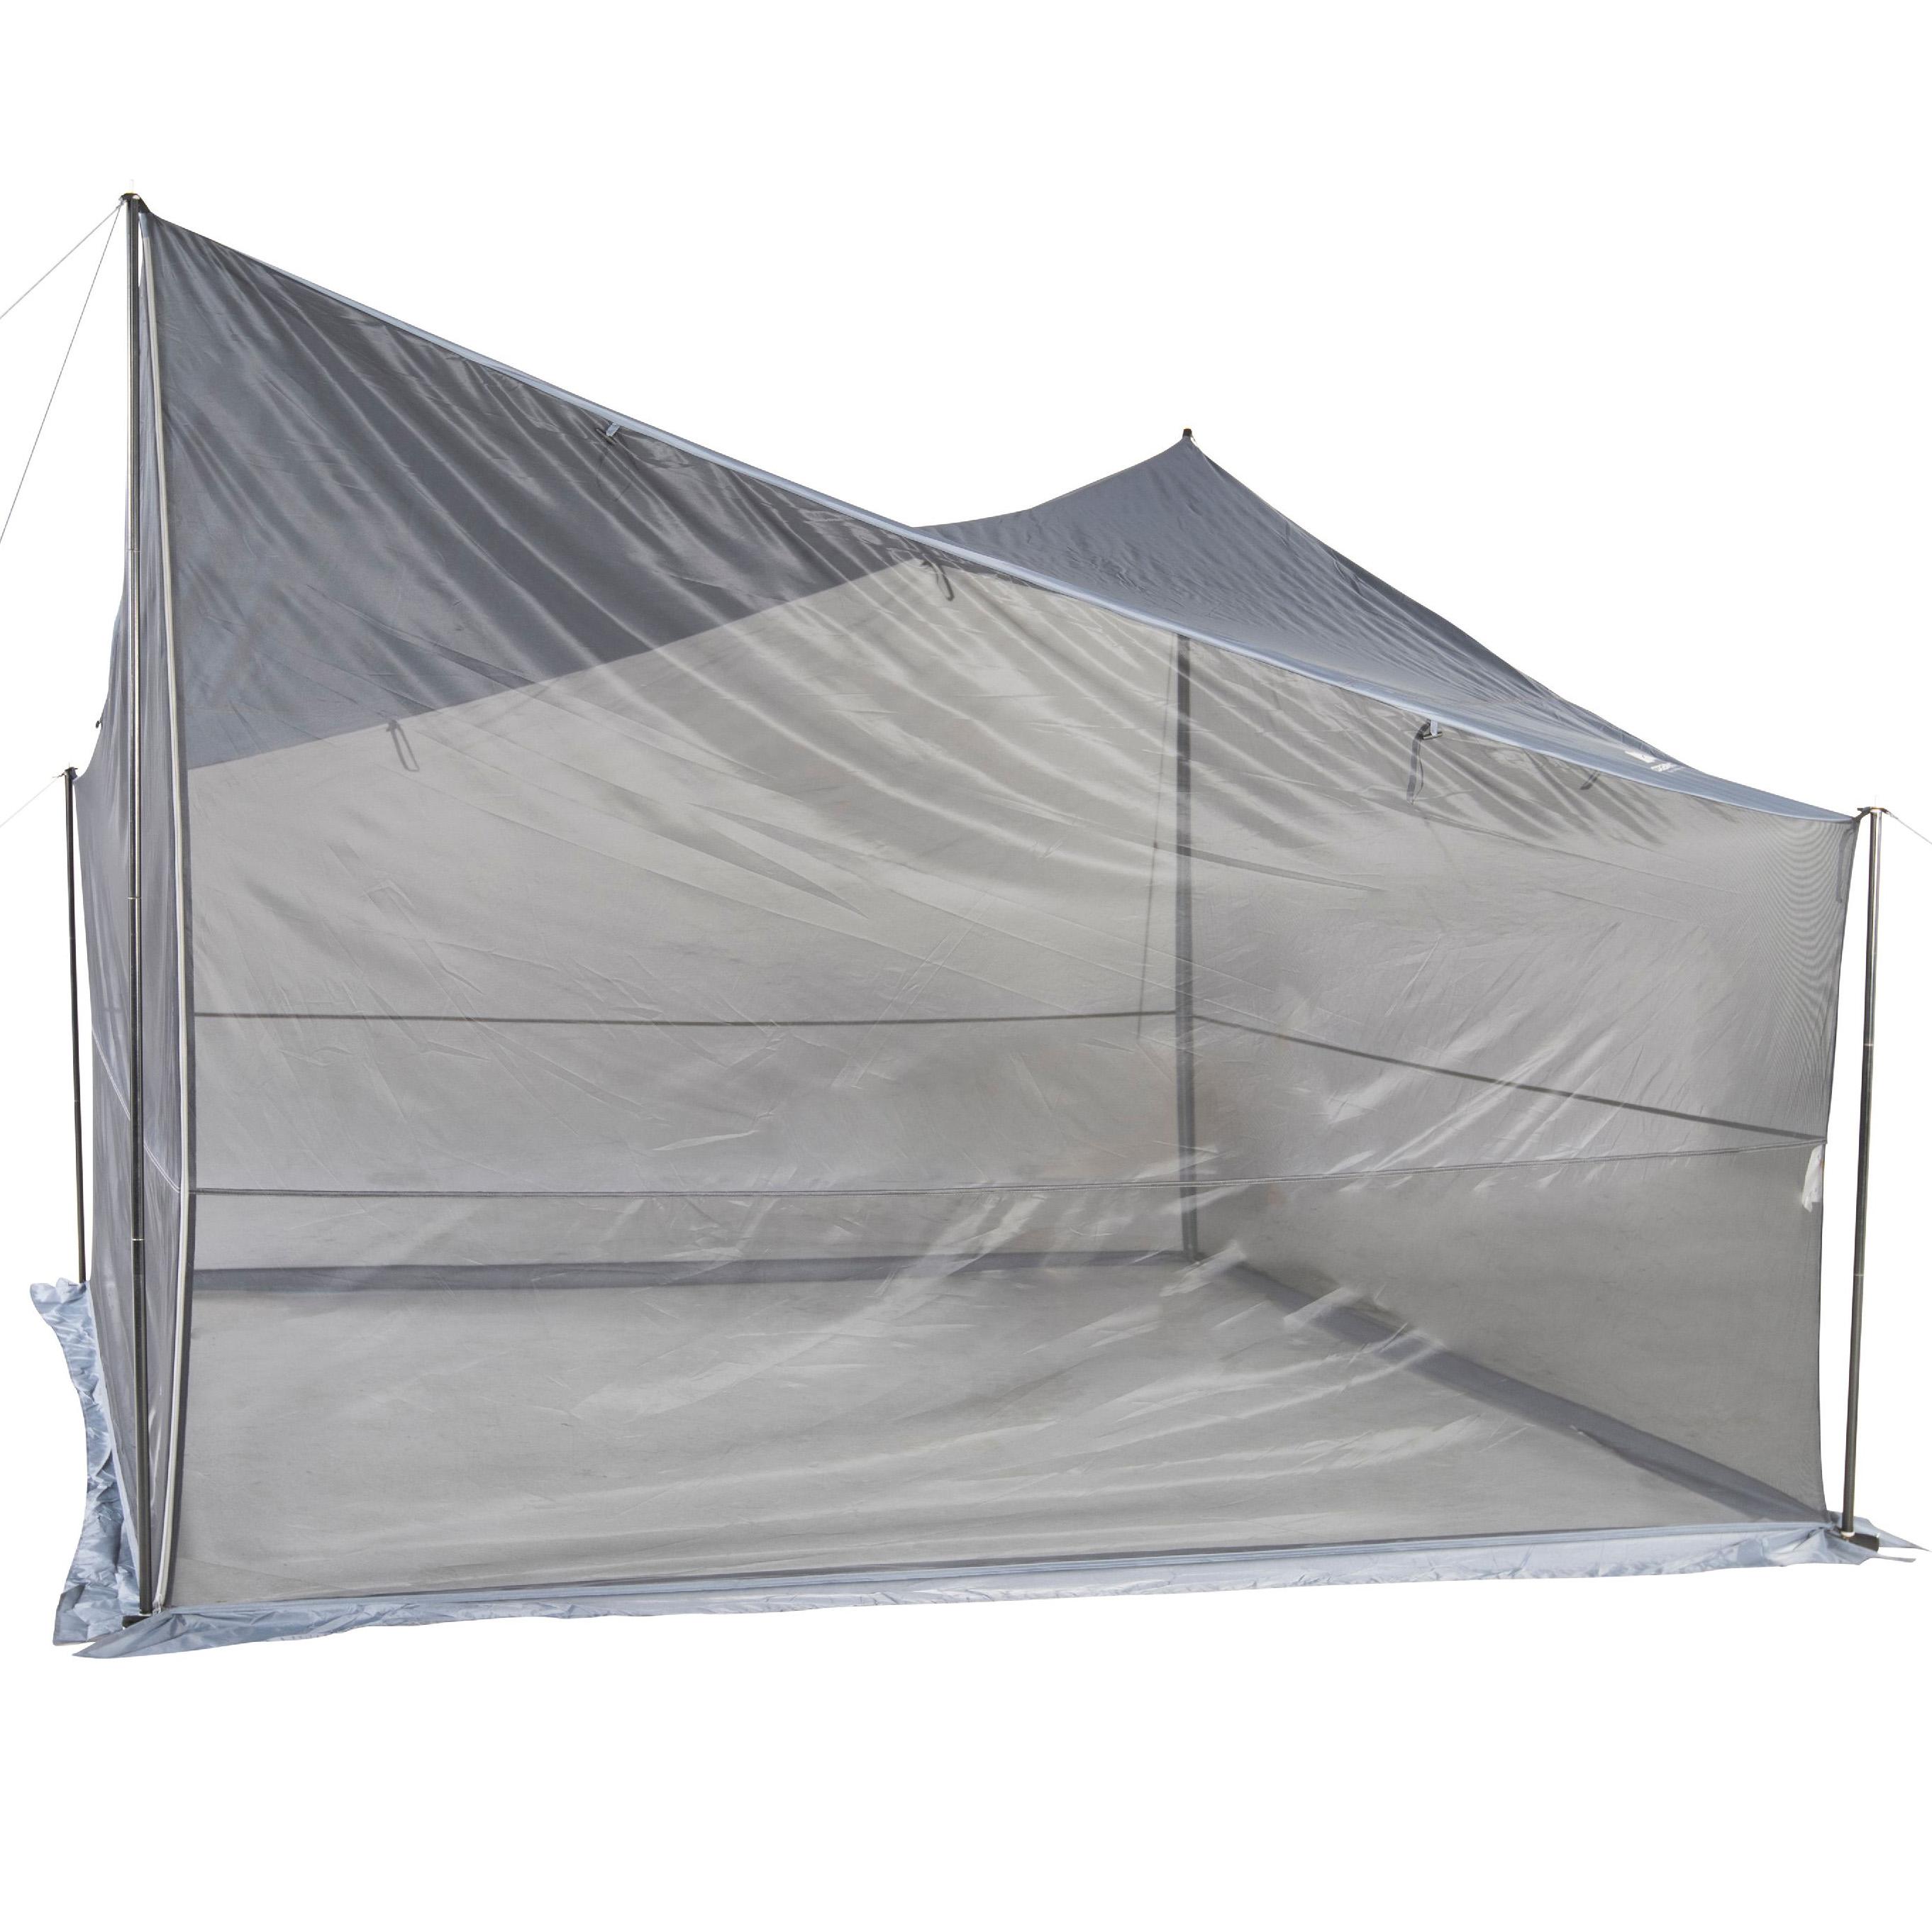 Ozark Trail Tarp Shelter with UV Protection and Roll-up Screen Walls for $34